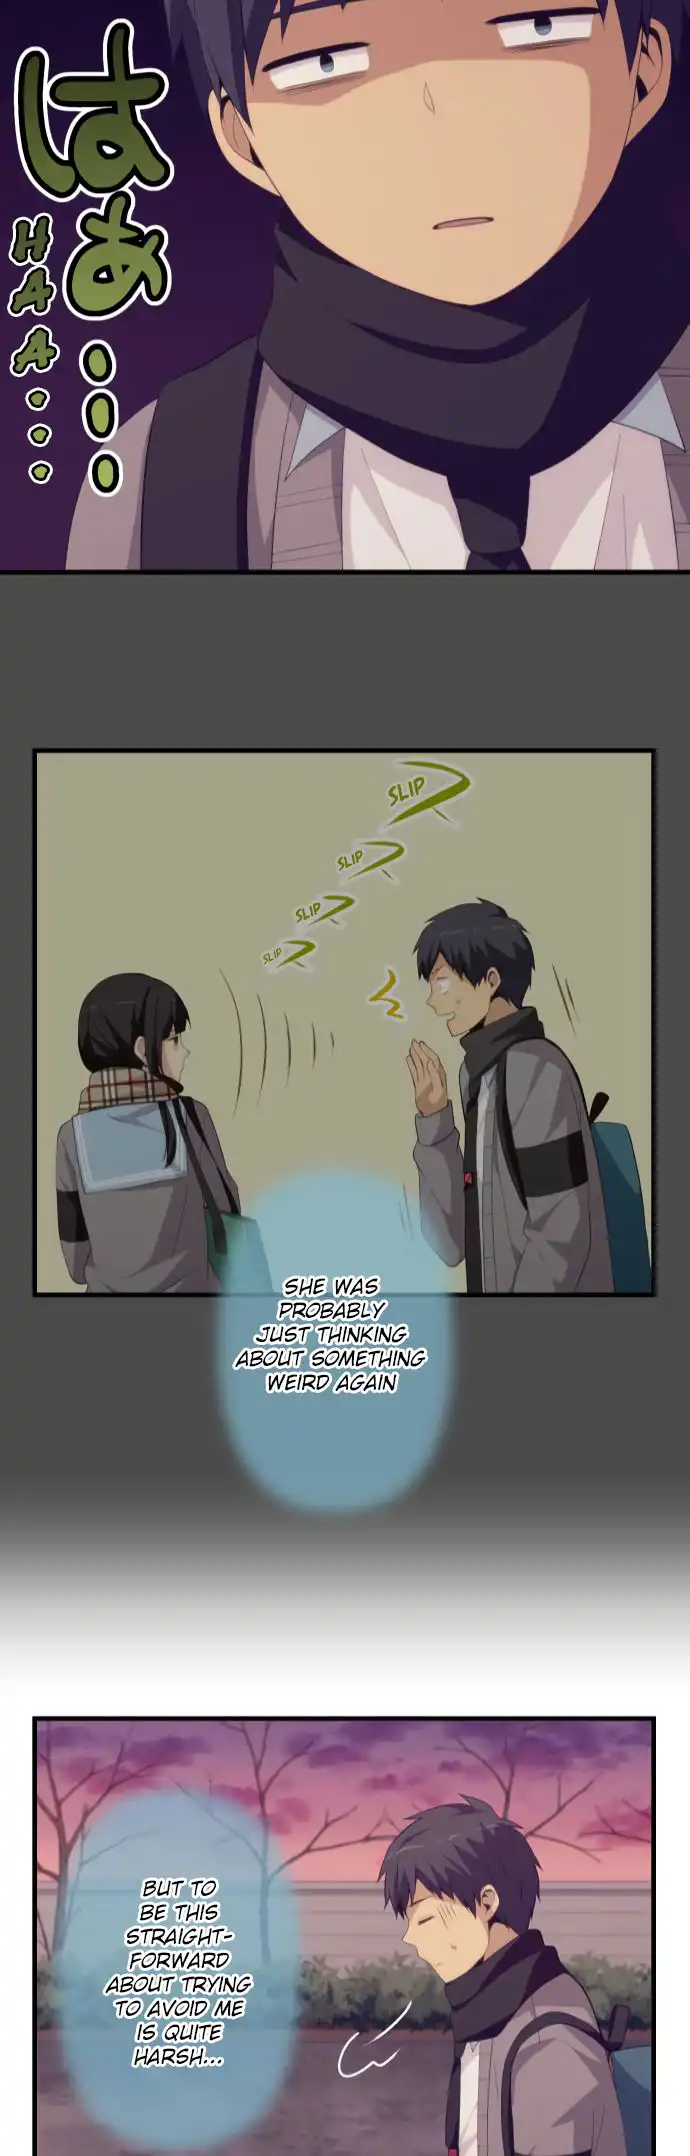 ReLIFE Chapter 191